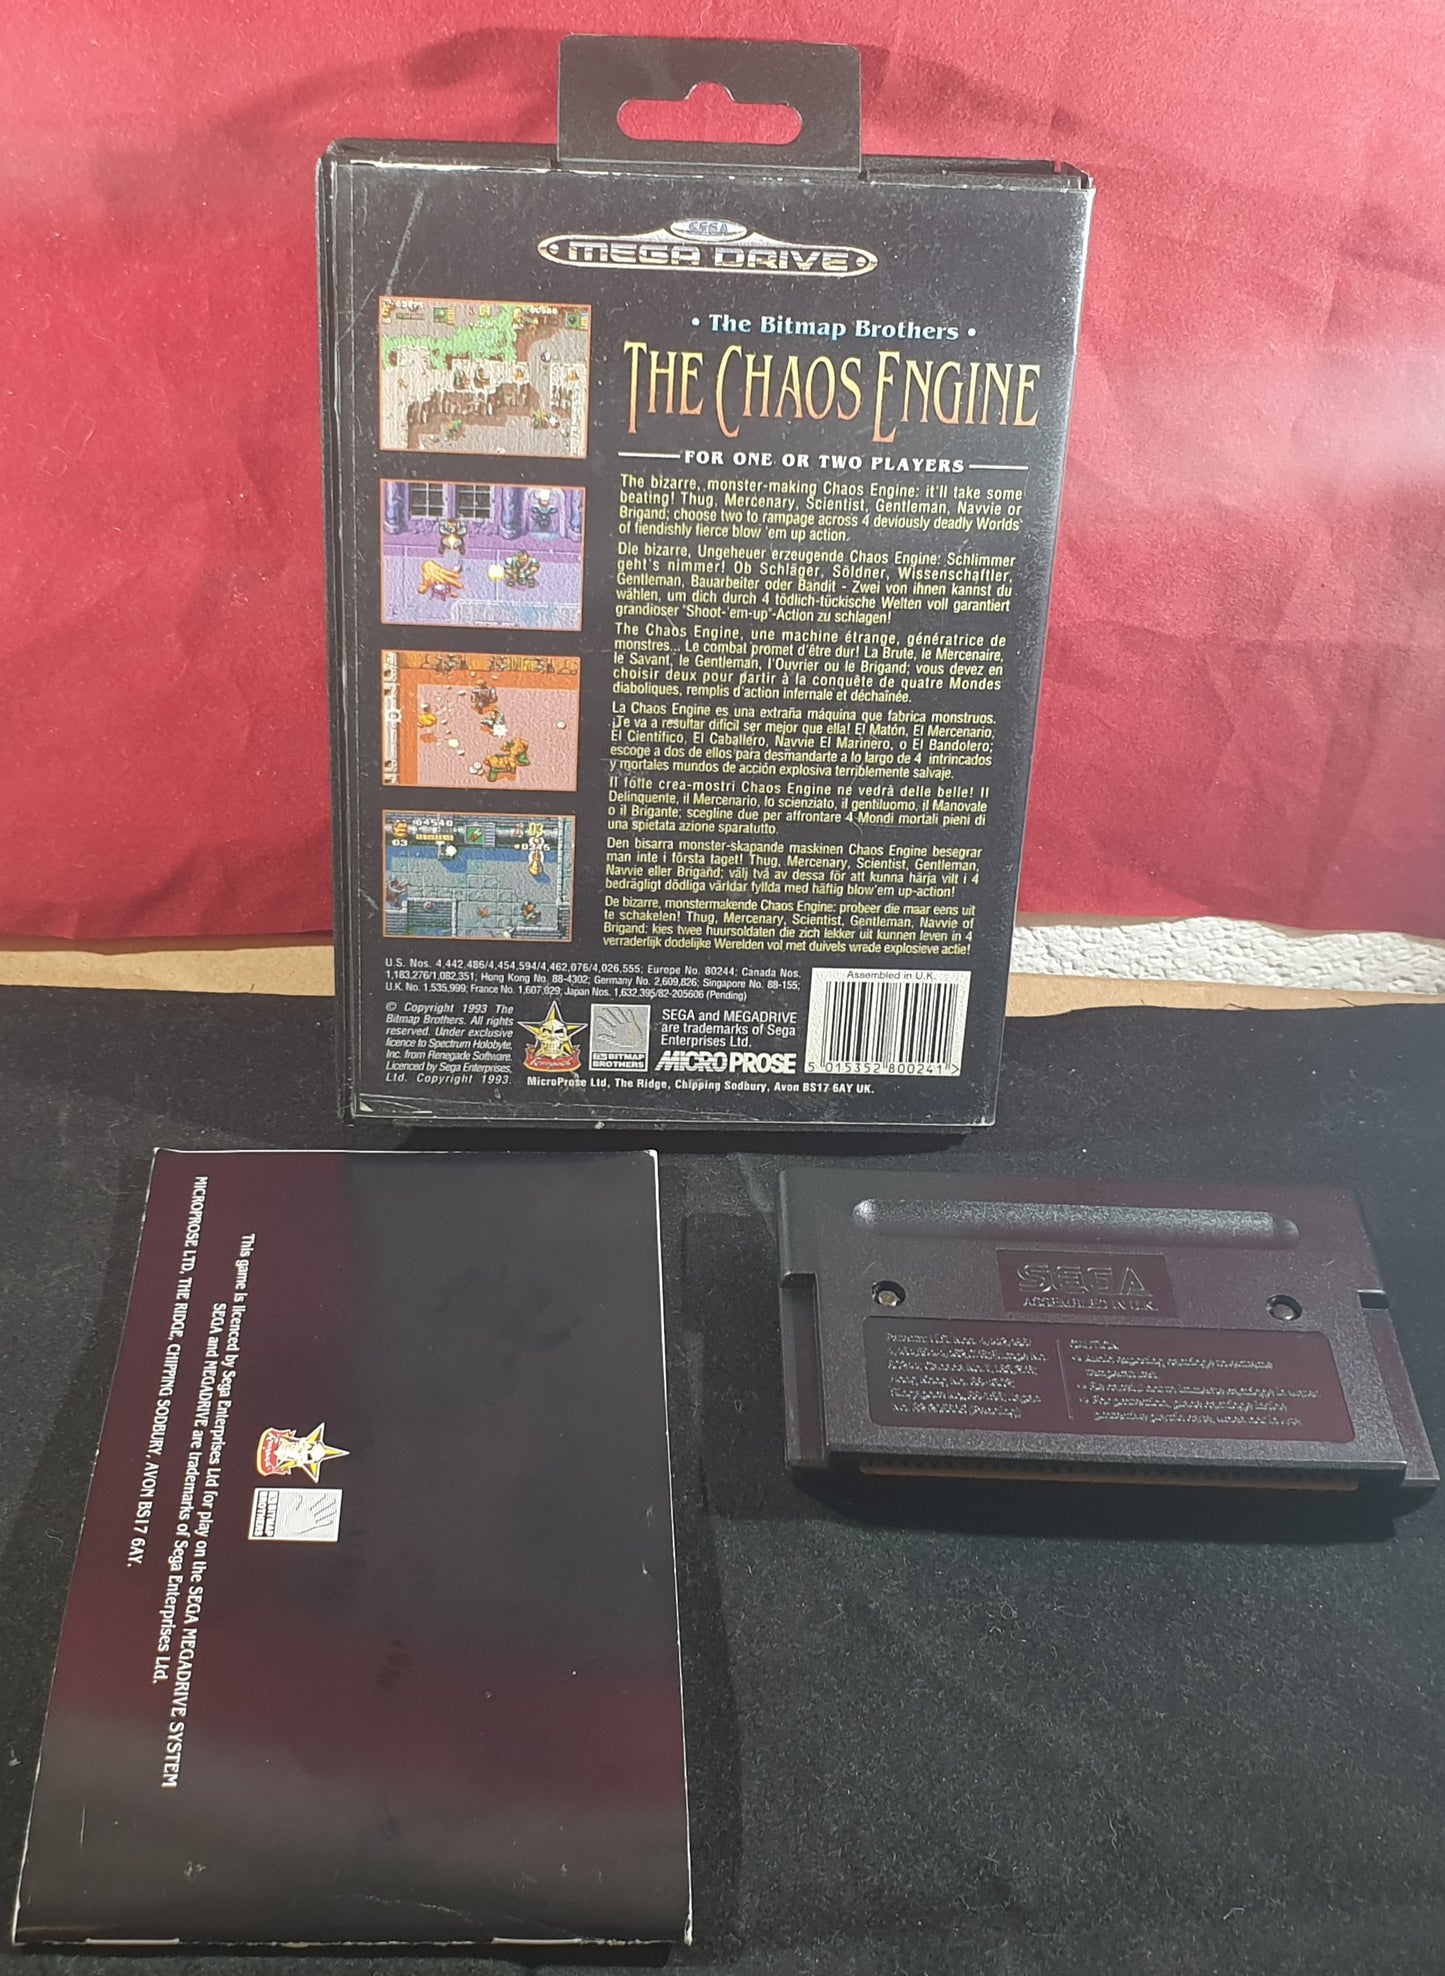 The Chaos Engine AKA Soldiers of Fortune Sega Mega Drive Game